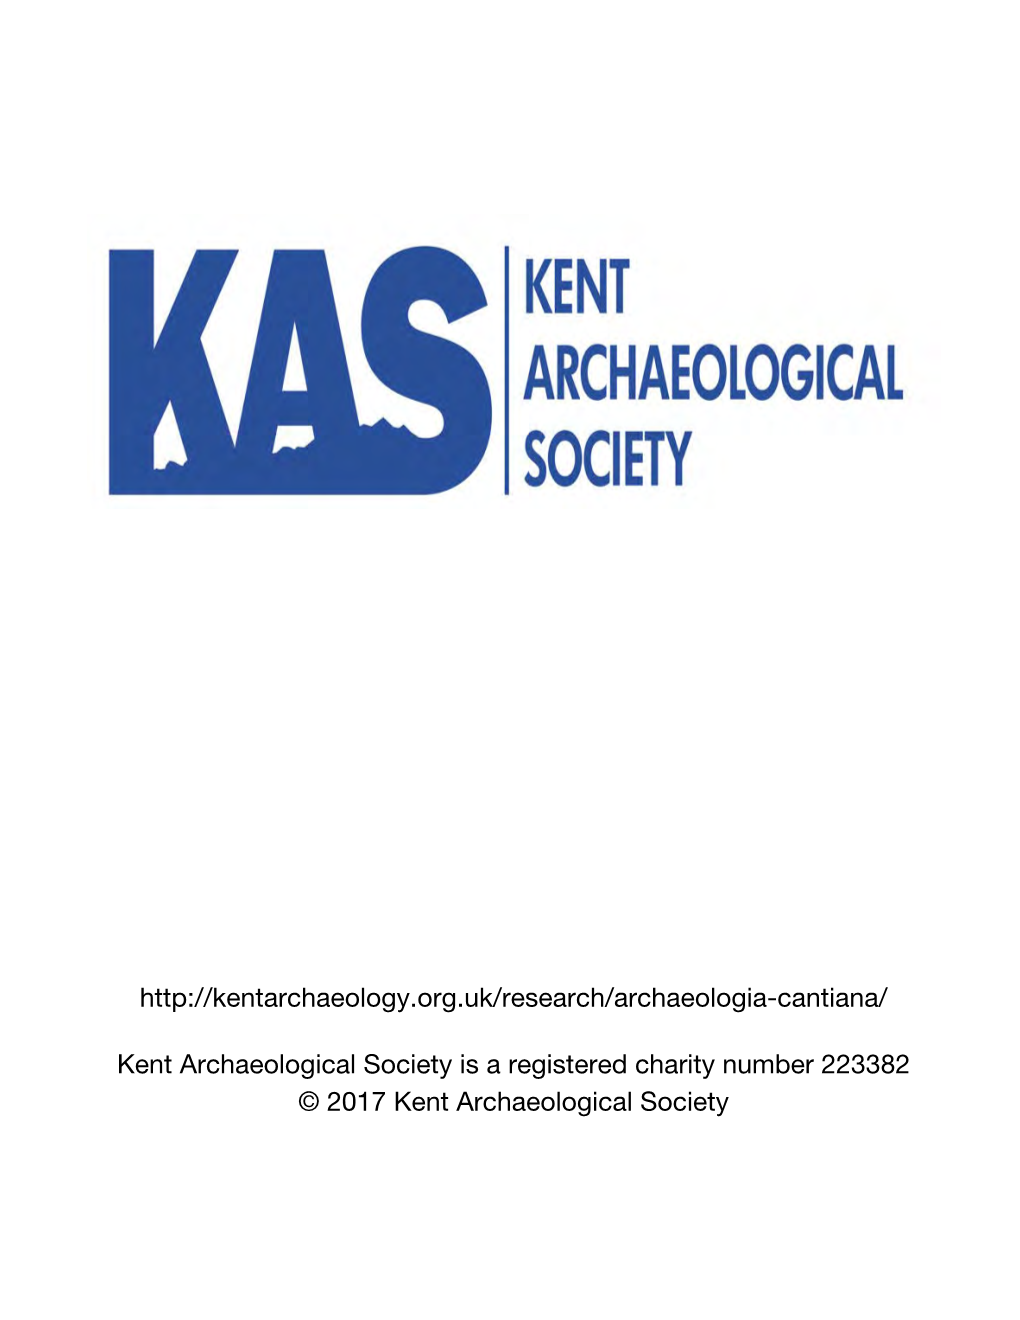 Researches and Discoveries in Kent